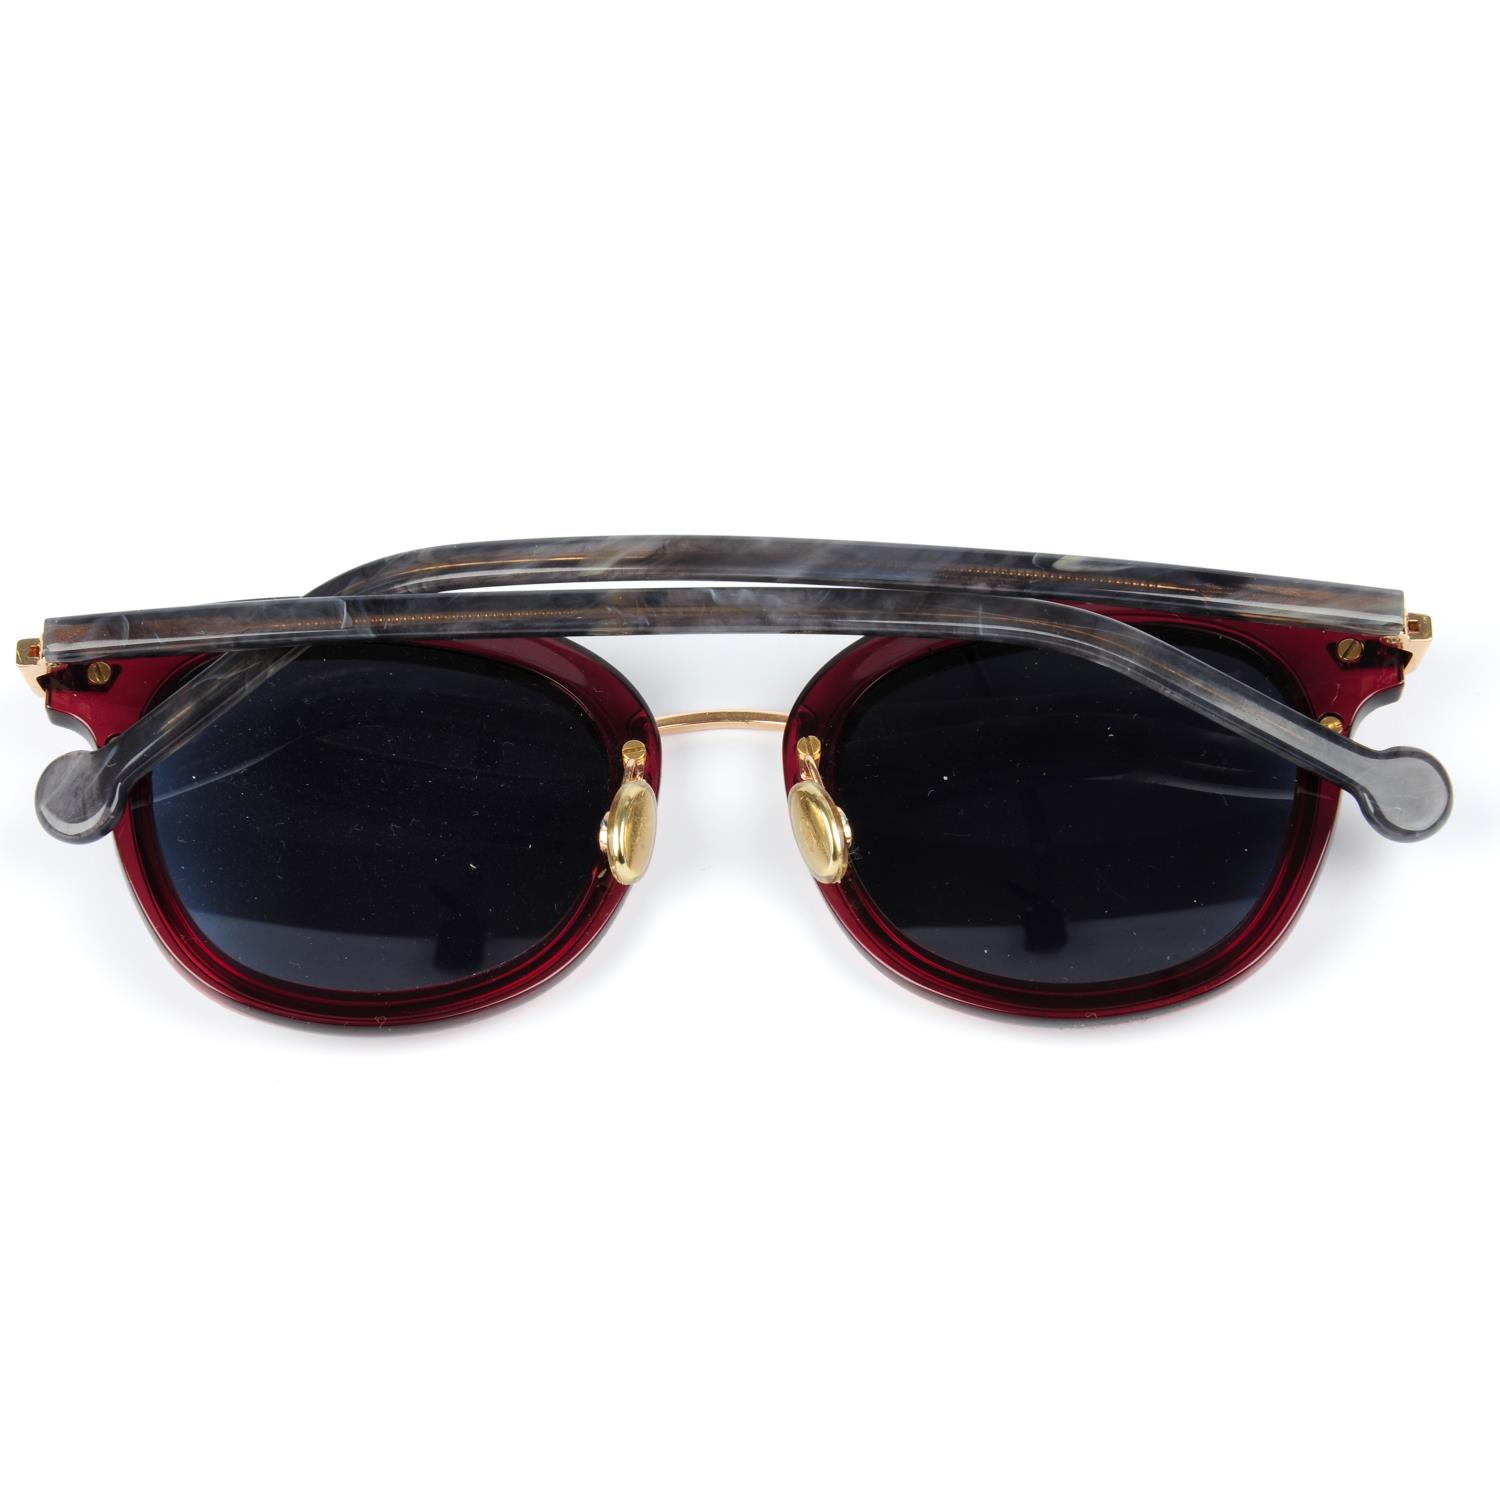 CHRISTIAN DIOR - a pair of sunglasses. - Image 2 of 4